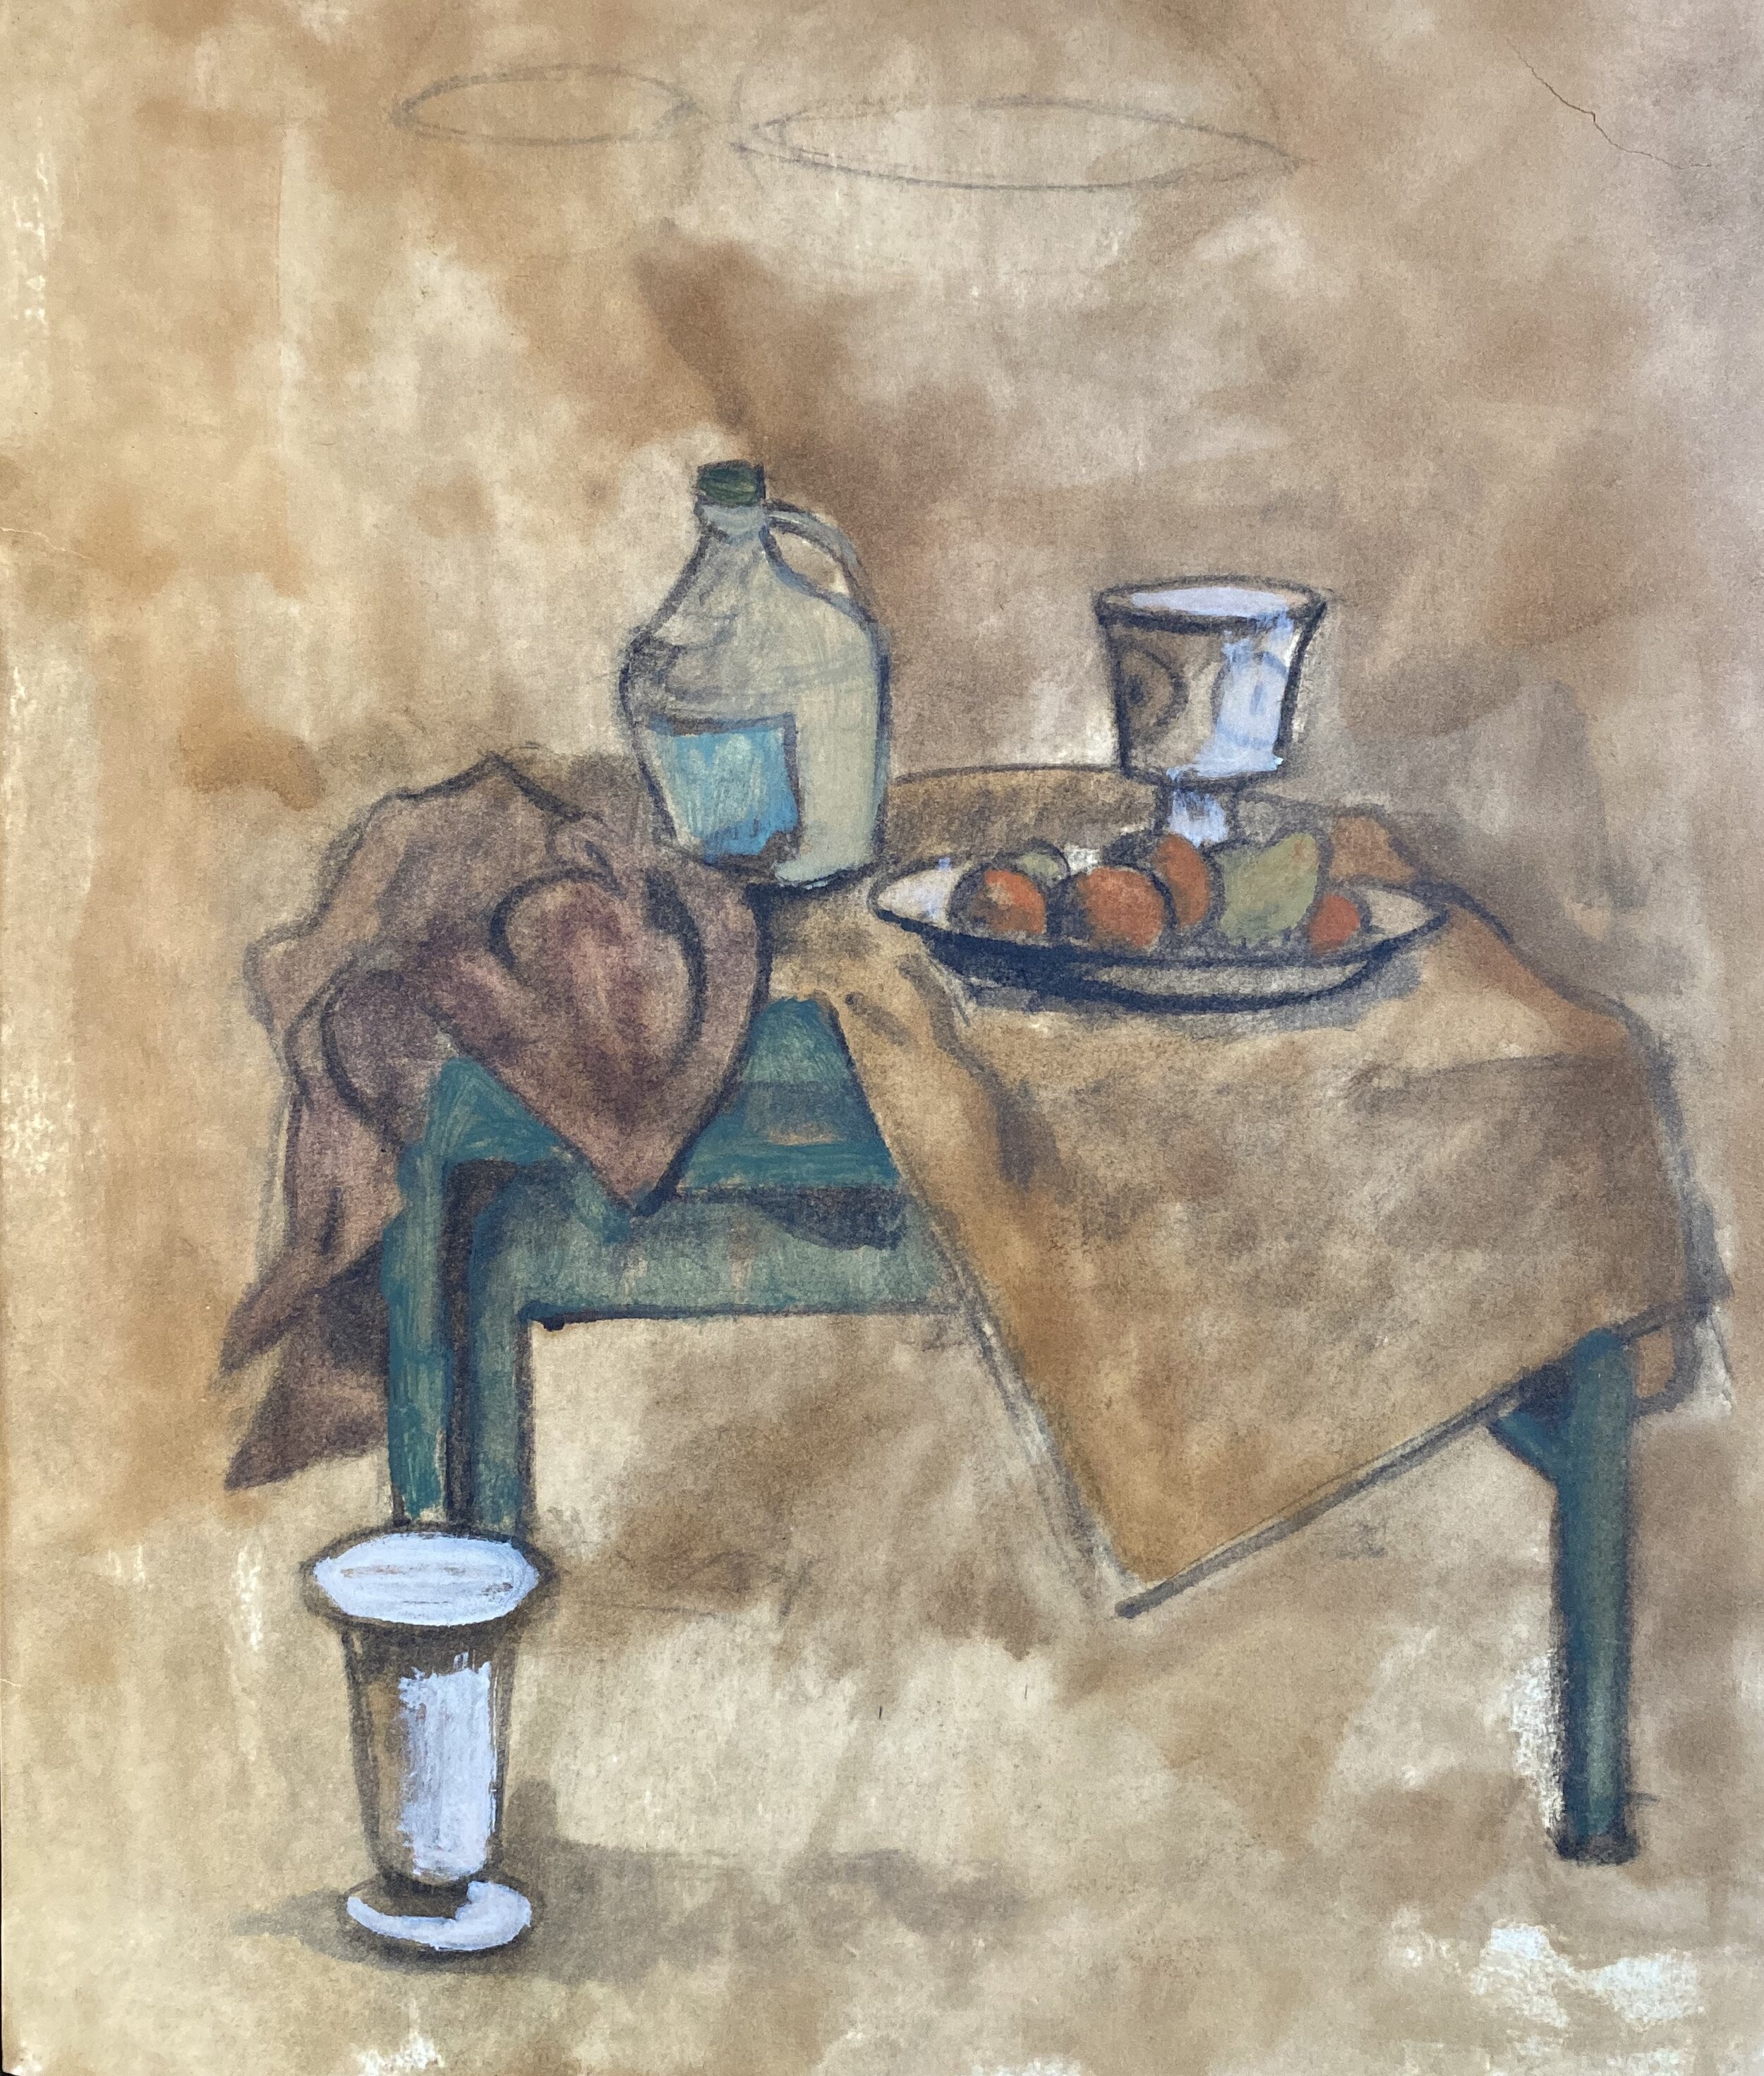   Description:   Still life   Medium:   Pastel and paint on paper   Dimensions:    H: 17 in   W: 14 in 